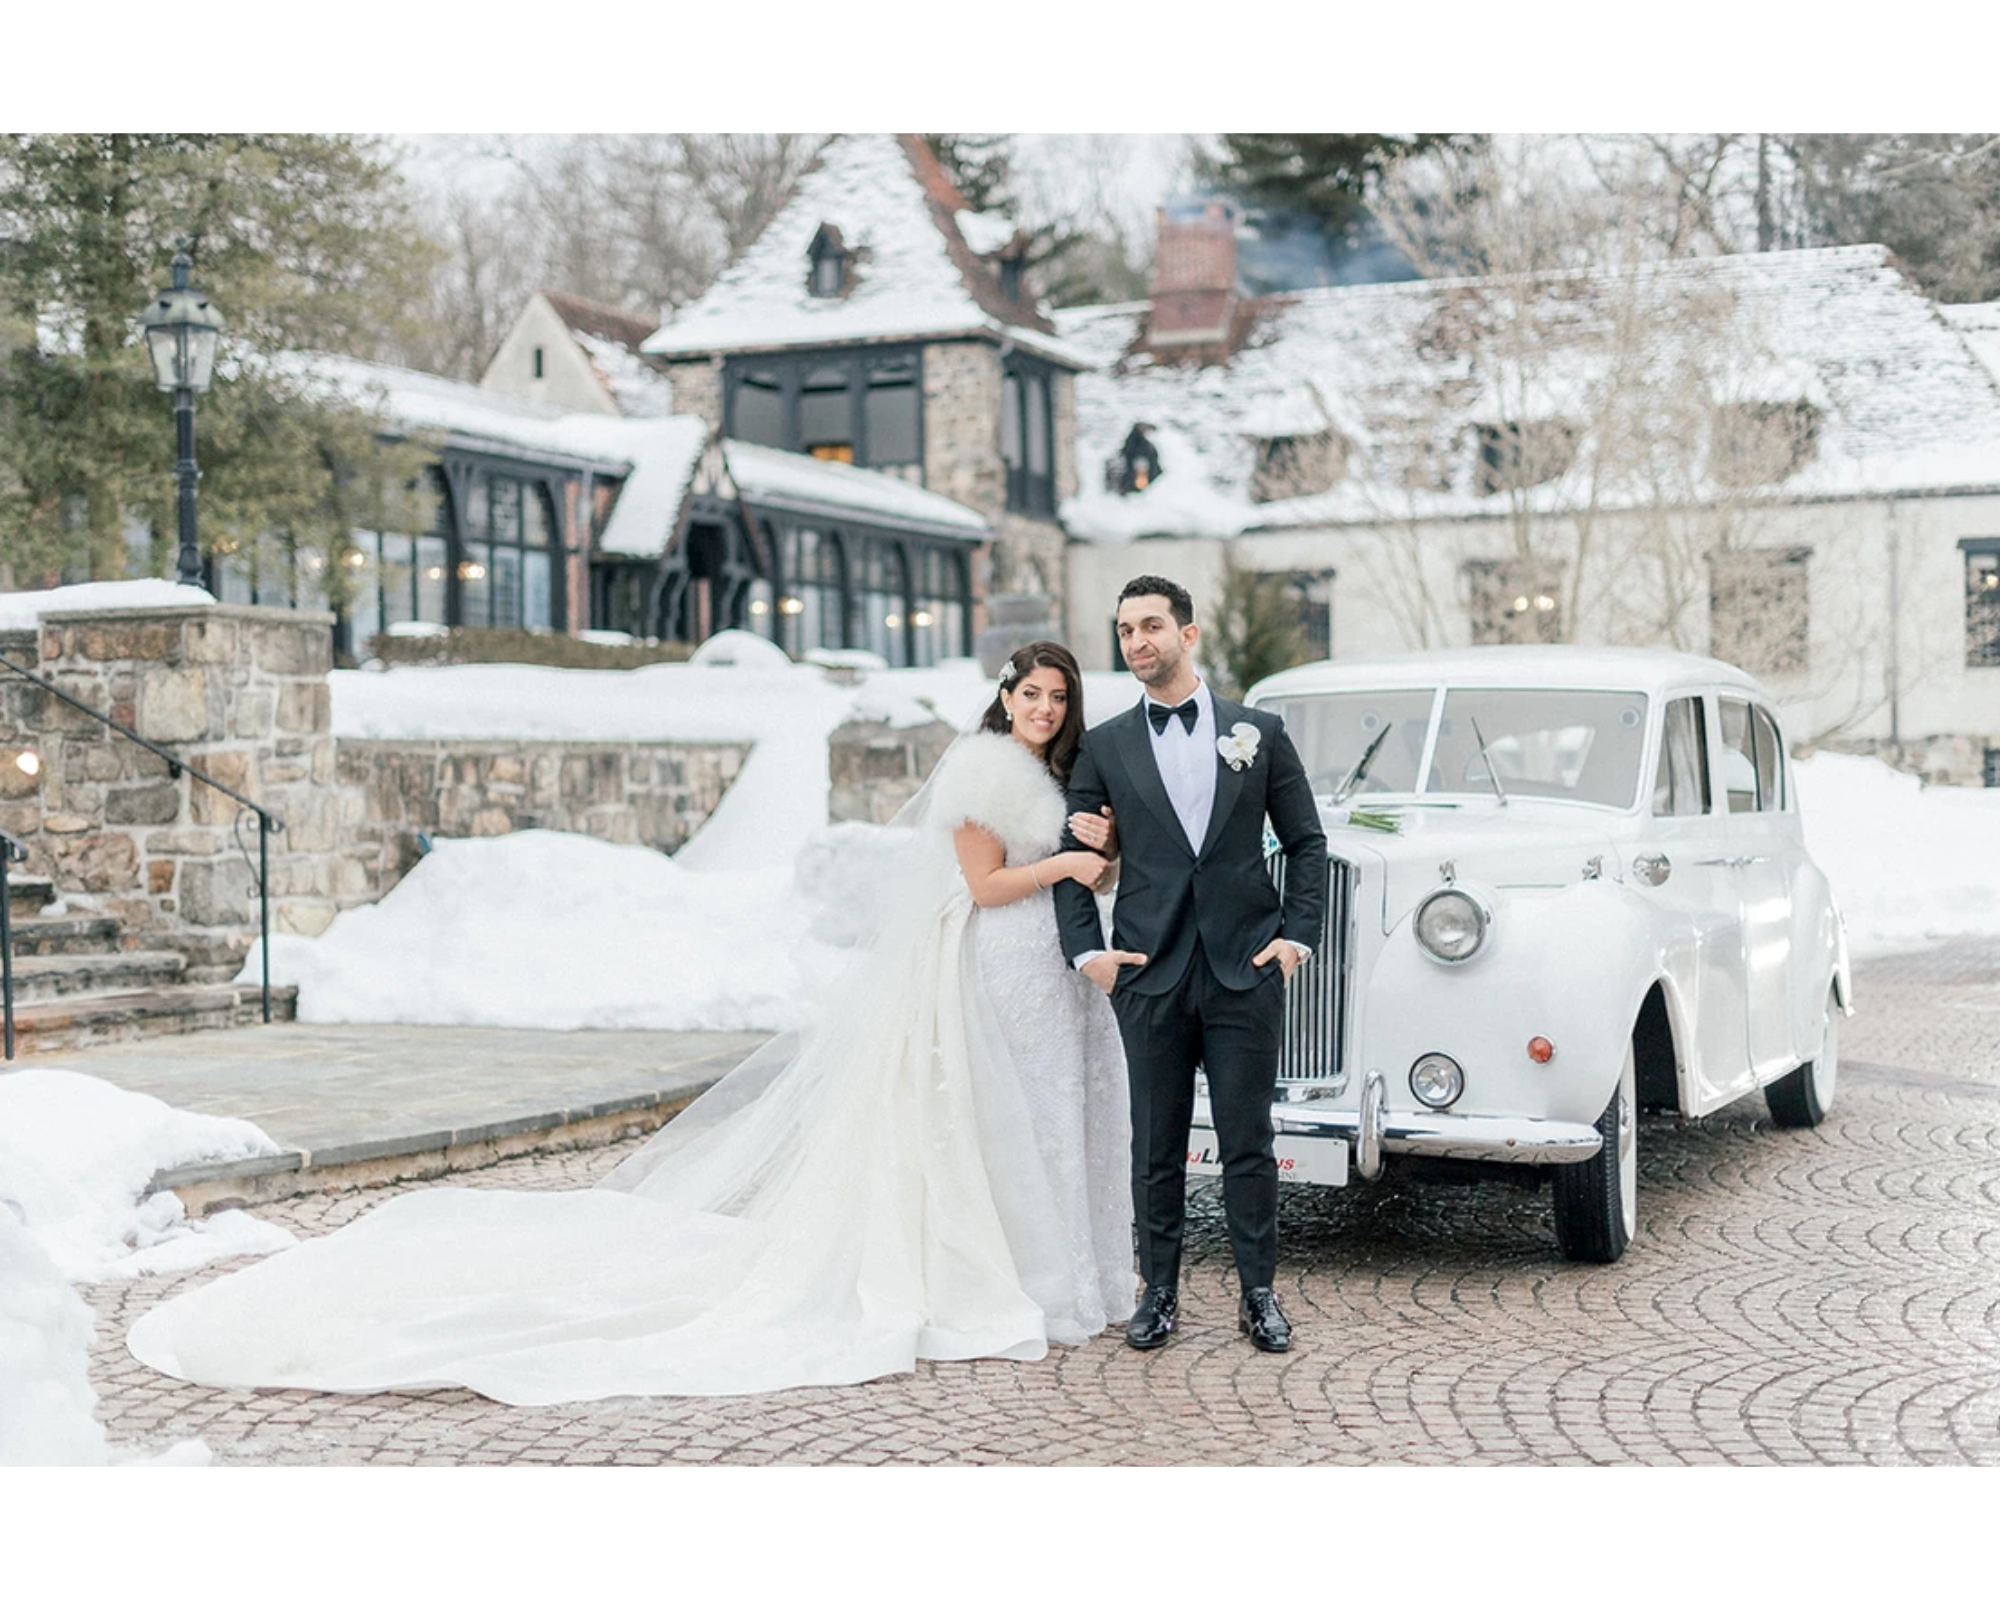 Our beautiful bride Victoria and her groom Teddy standing in front Rolls Royce on their snowy wedding day.